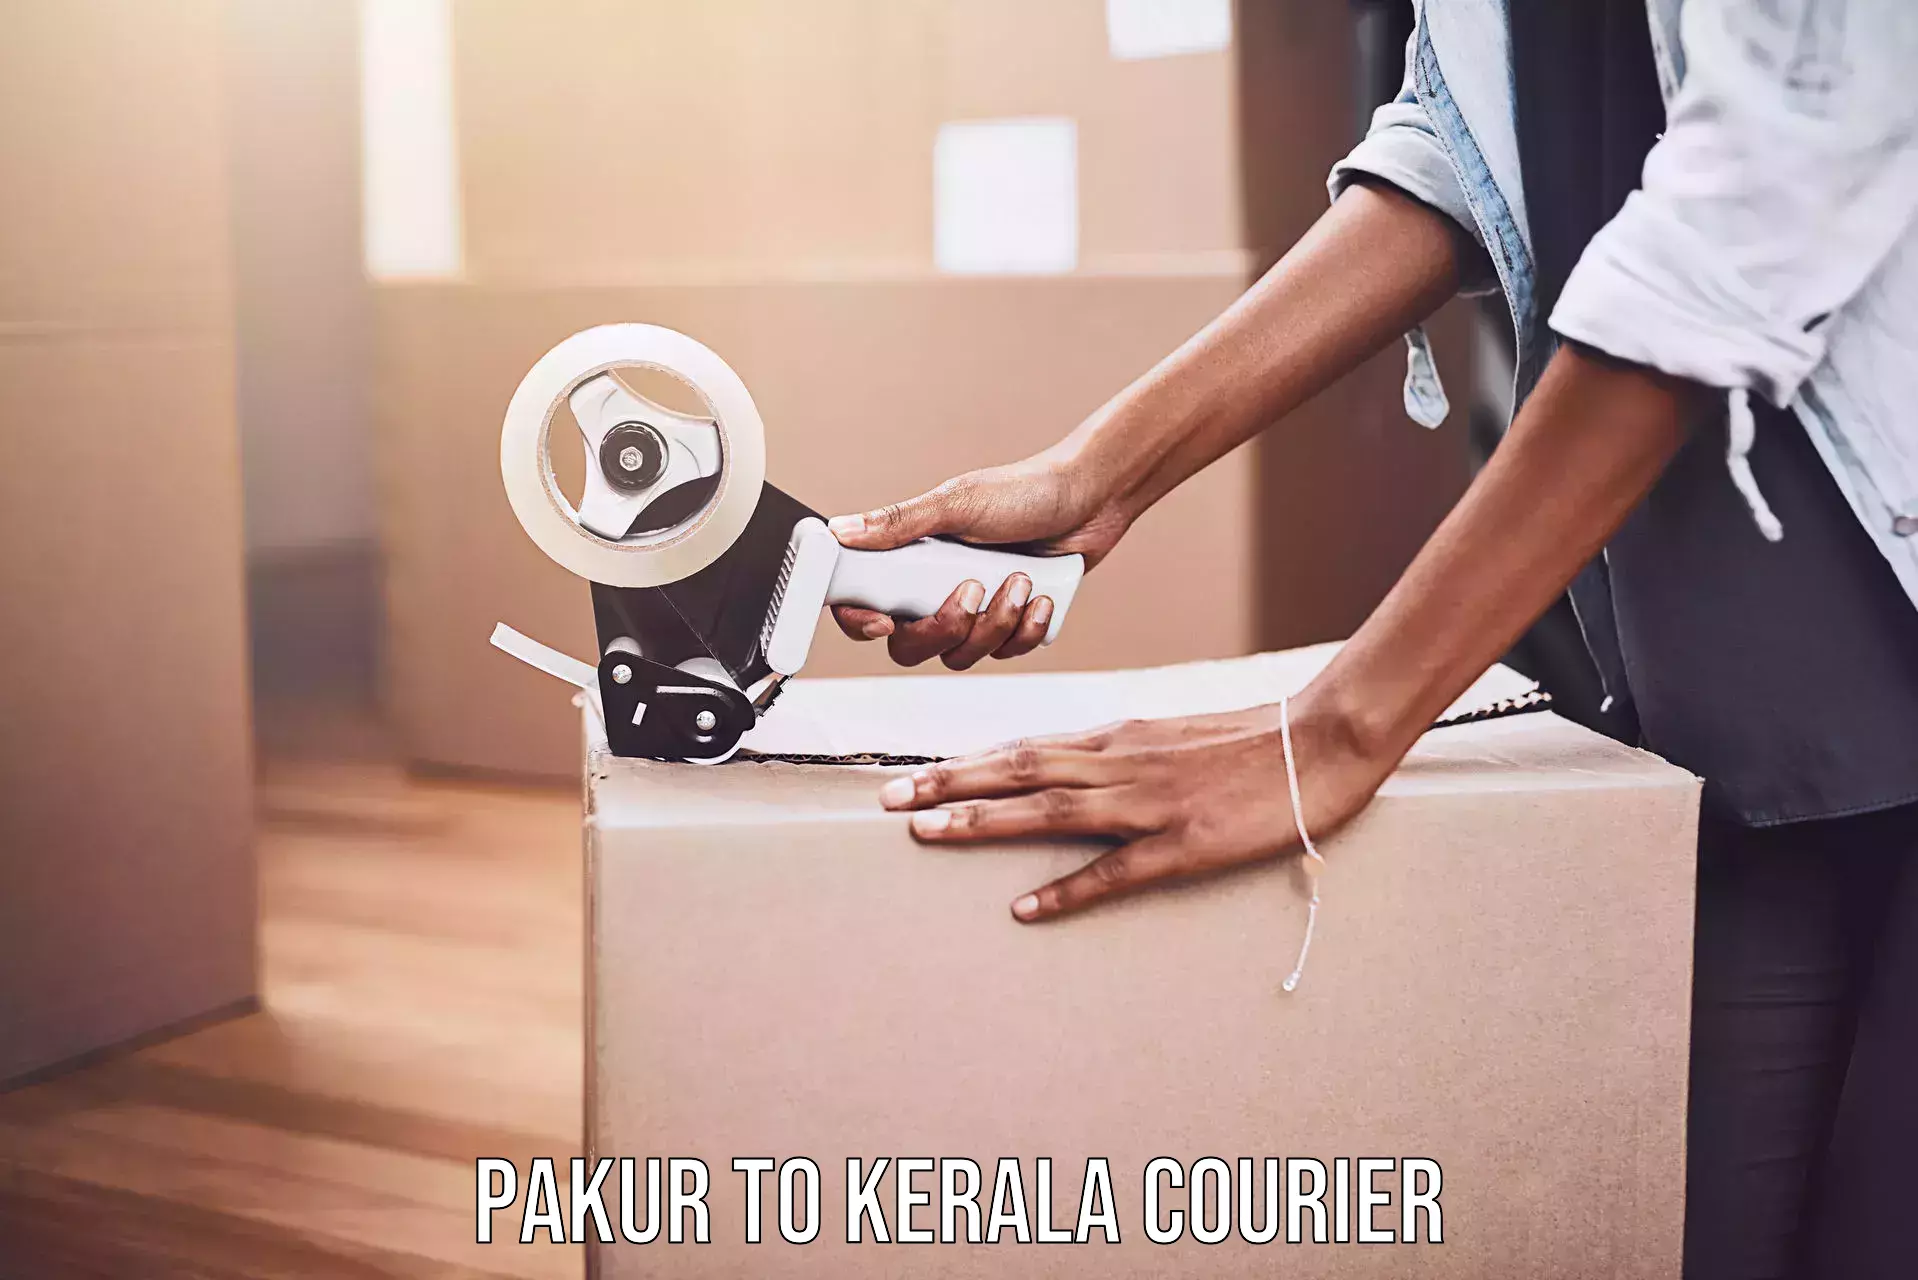 Reliable courier service Pakur to Kerala